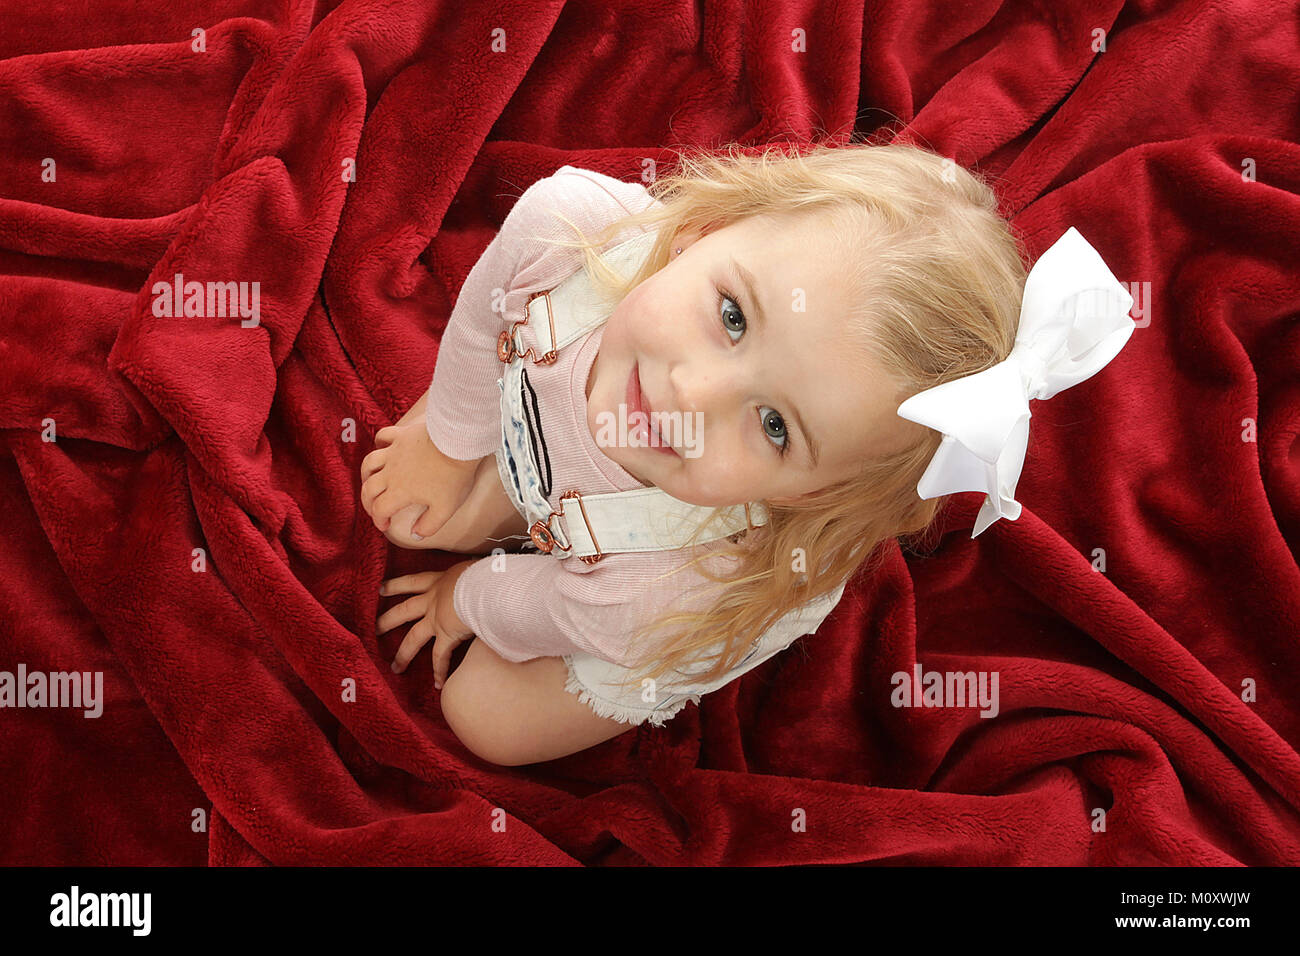 pretty 3 year old girl playing on soft red blanket Stock Photo